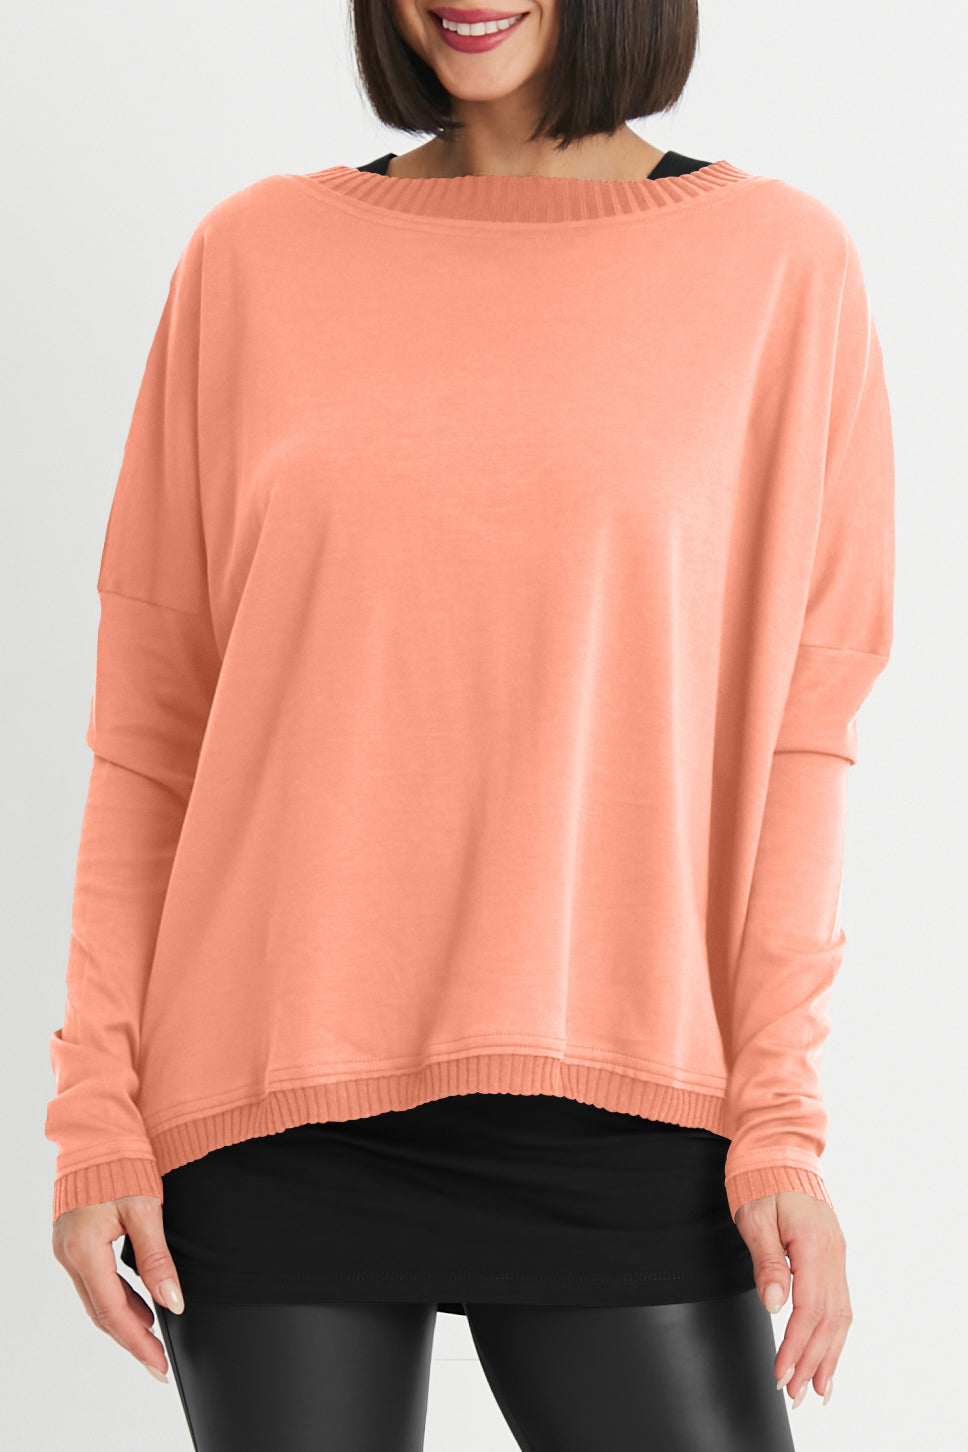 Pima Cotton Off The Shoulder Tee